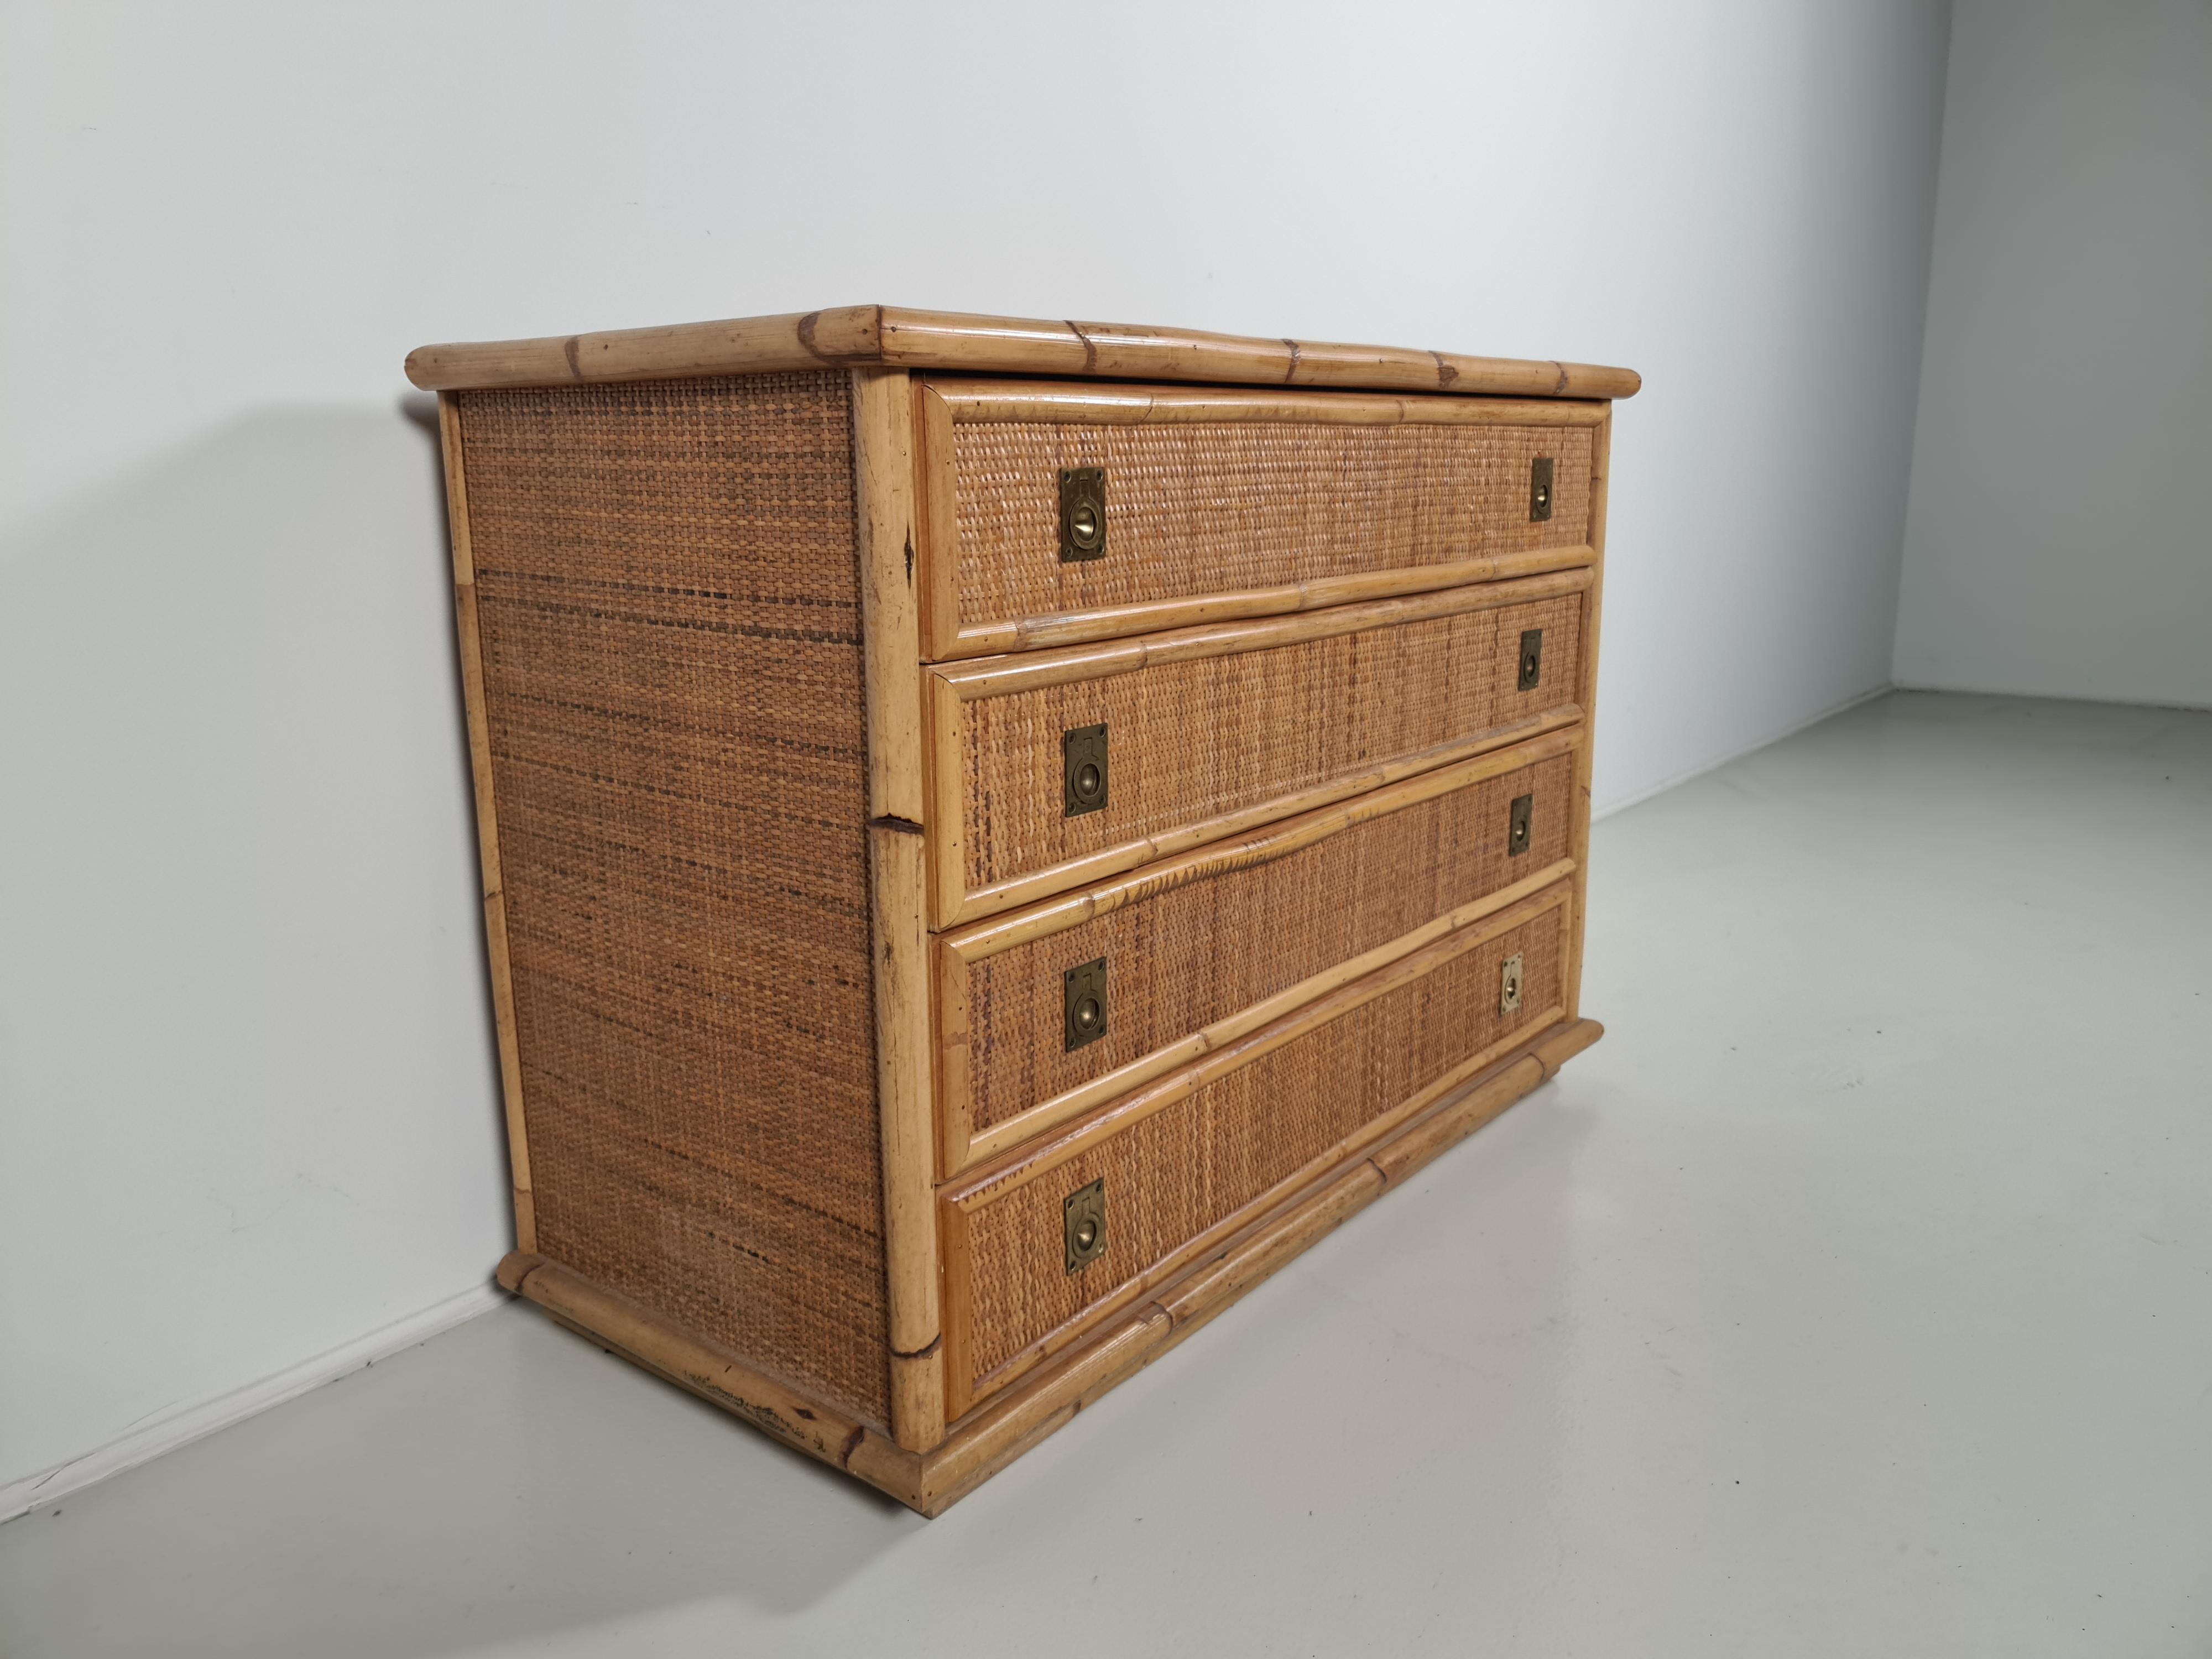 Nice mix of bamboo, rattan raffia wicker and brass handle chest of drawers or commode by the manufacture Dal Vera. 

 The brass handles on the drawers are lovely examples of high-quality craftsmanship. The design was inspired by mid-century modern